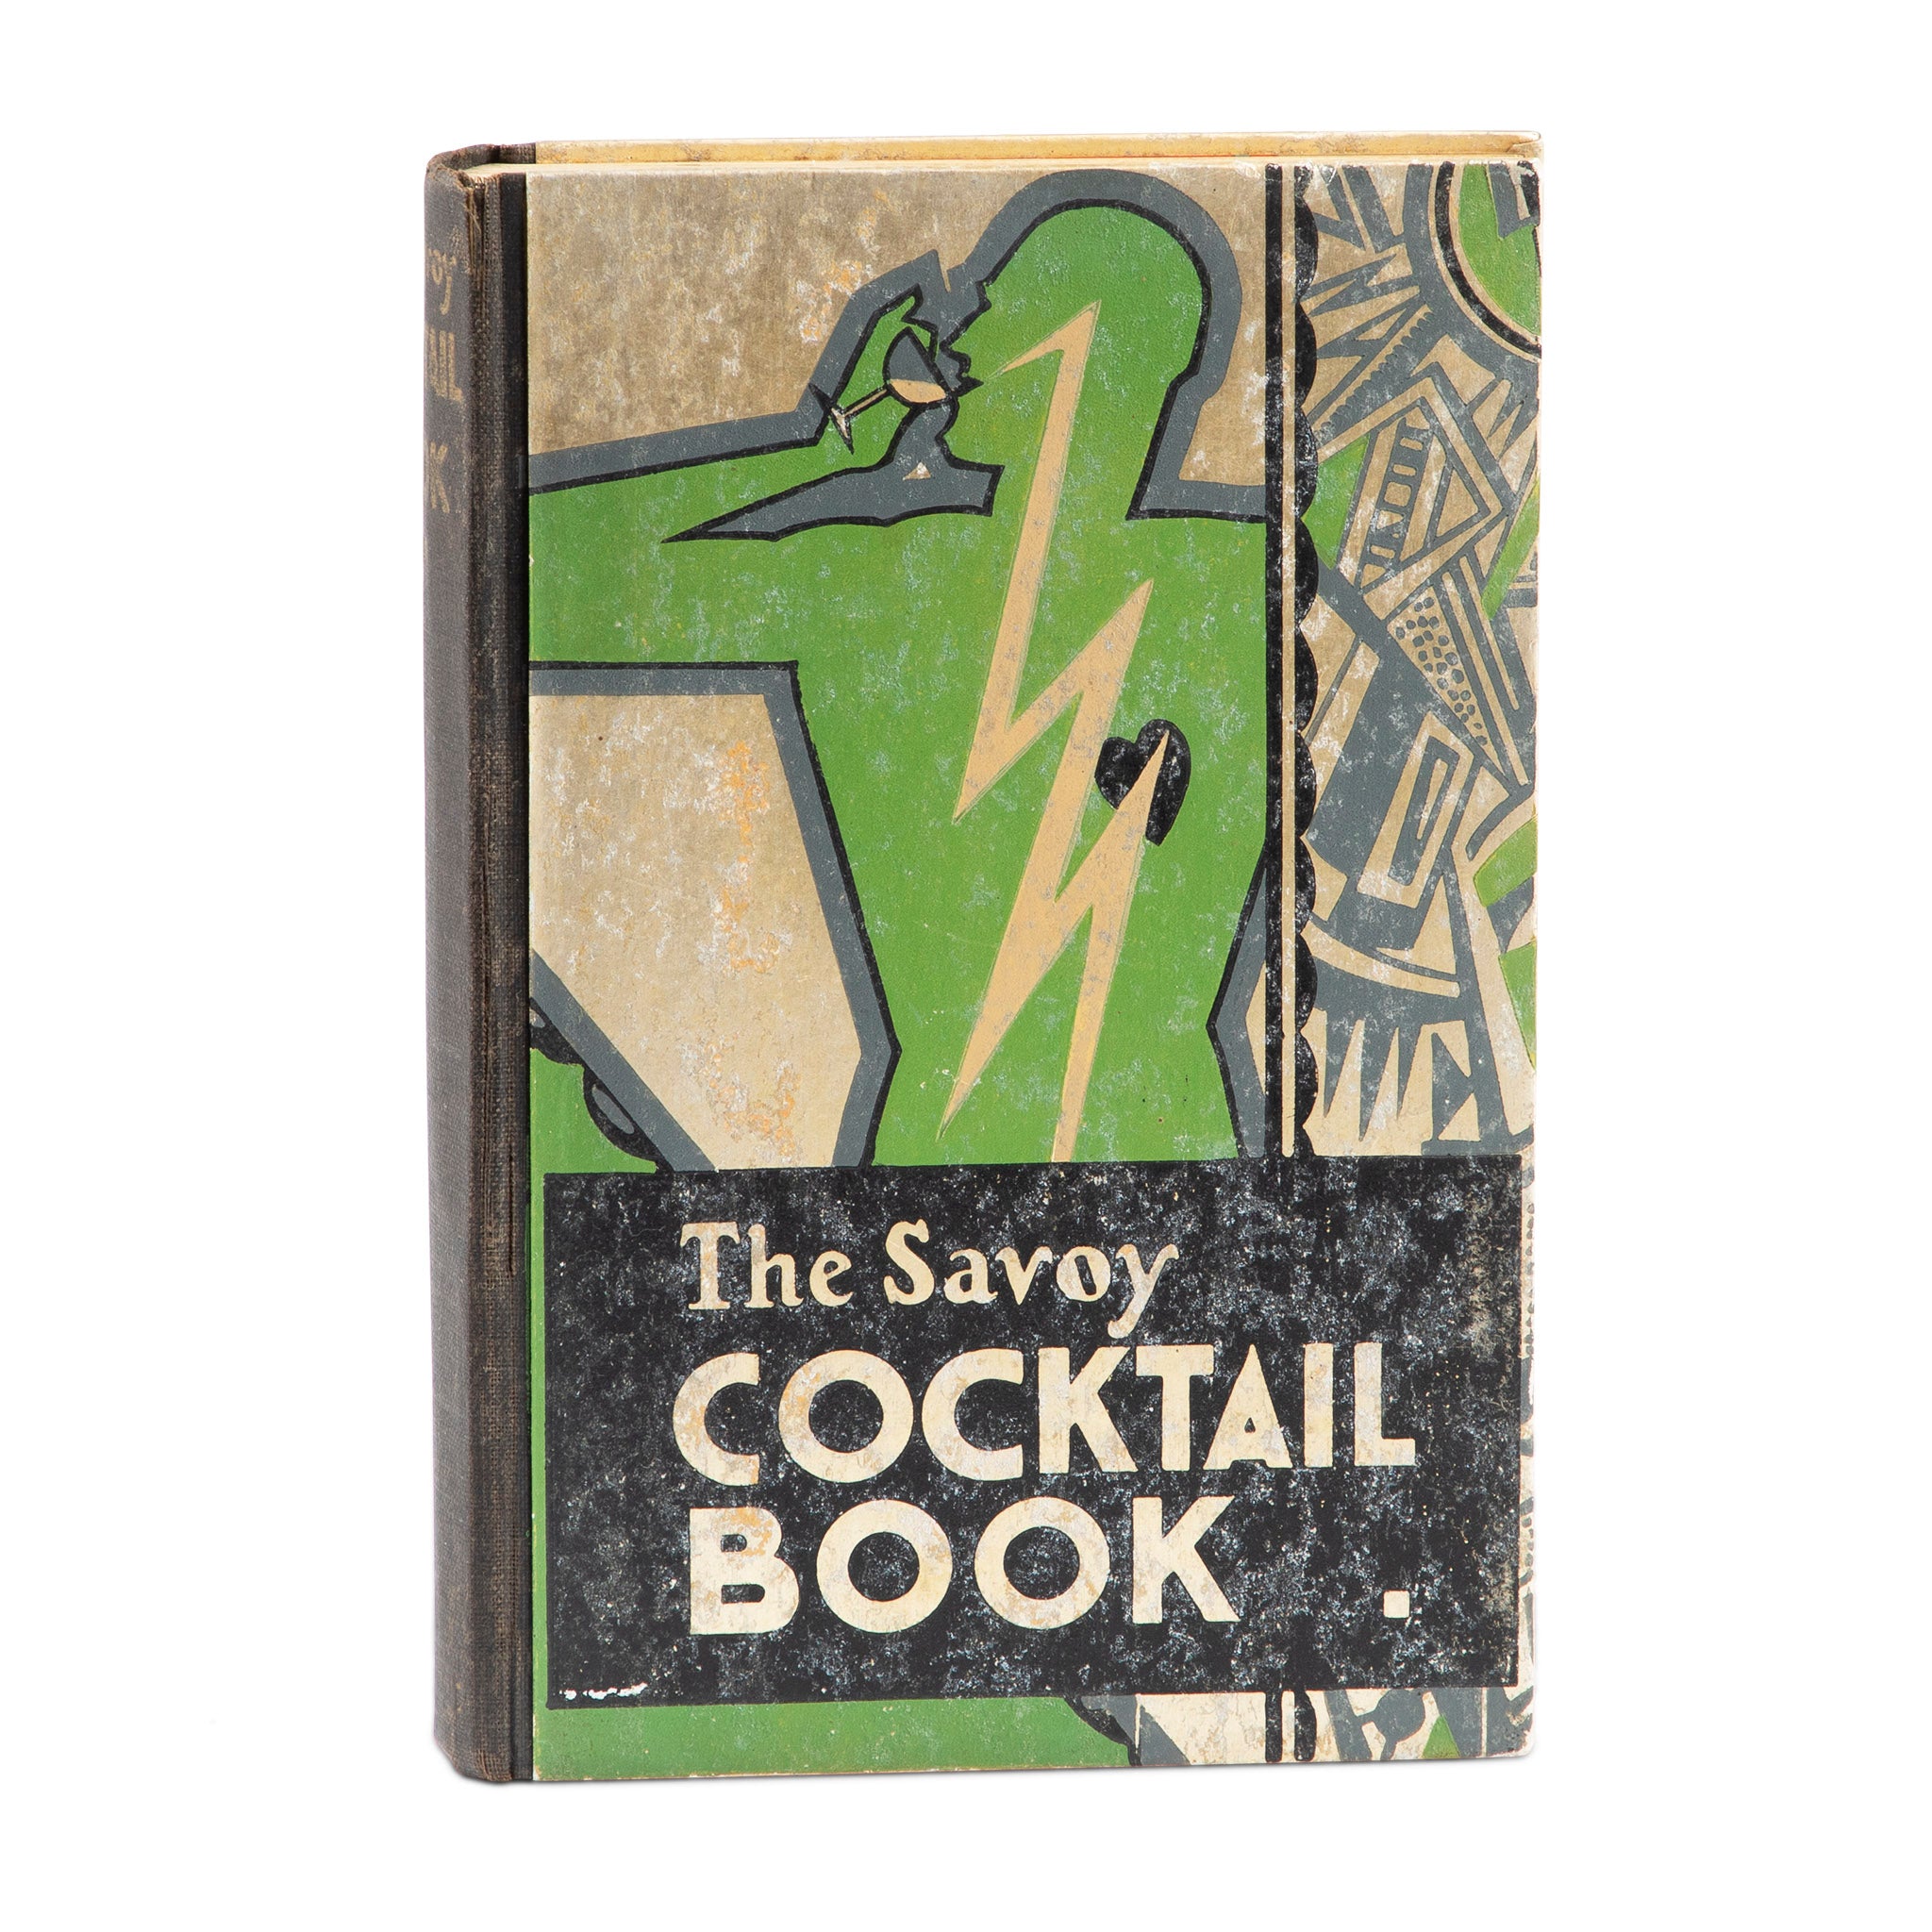 The Savoy Cocktail Book - First Edition - by Harry Craddock